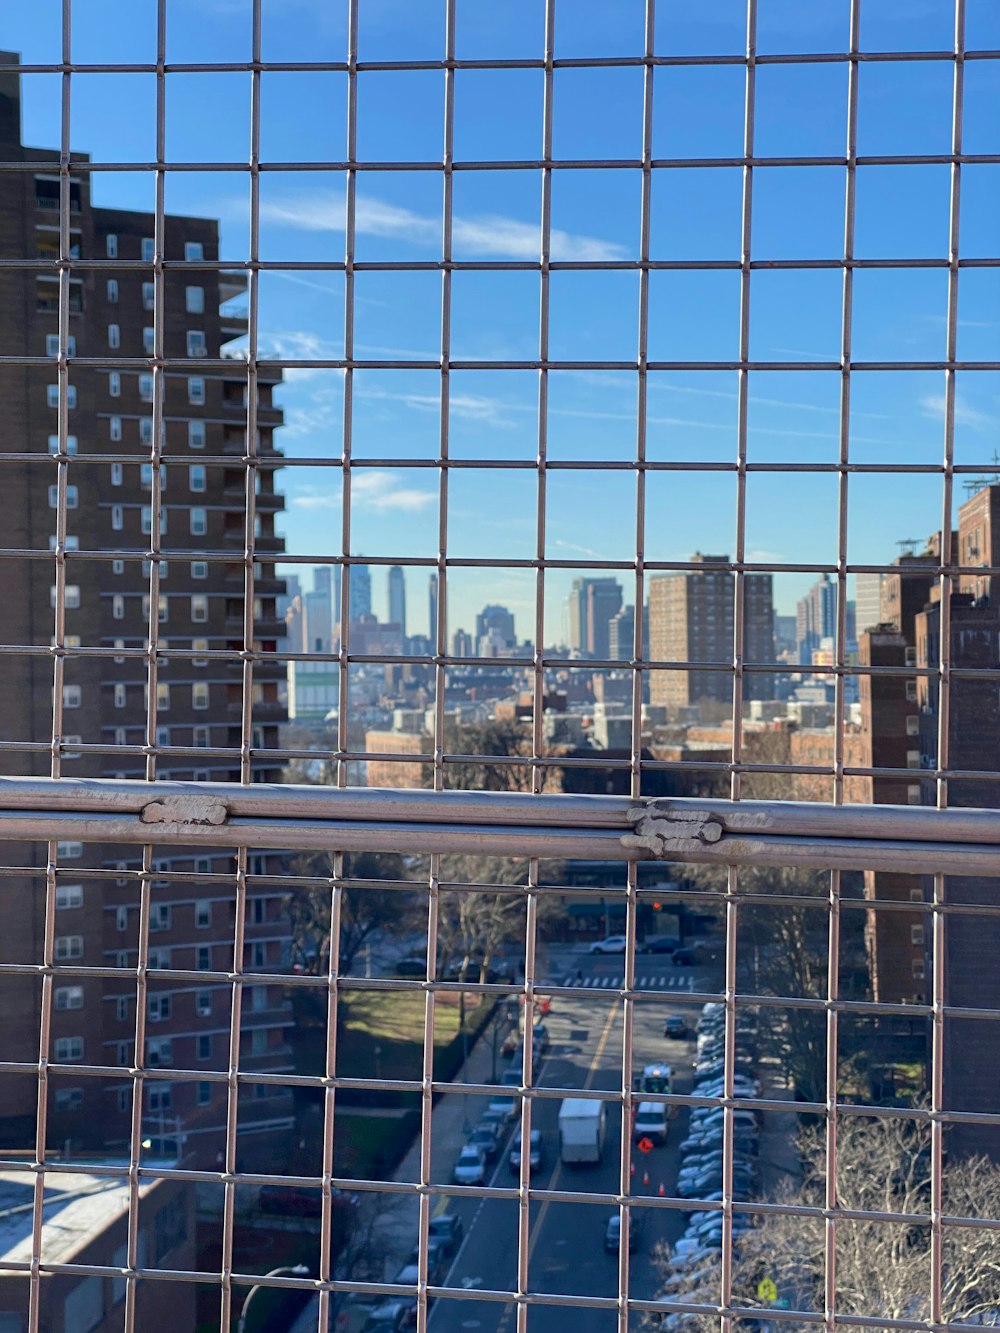 a view of a city through a fence